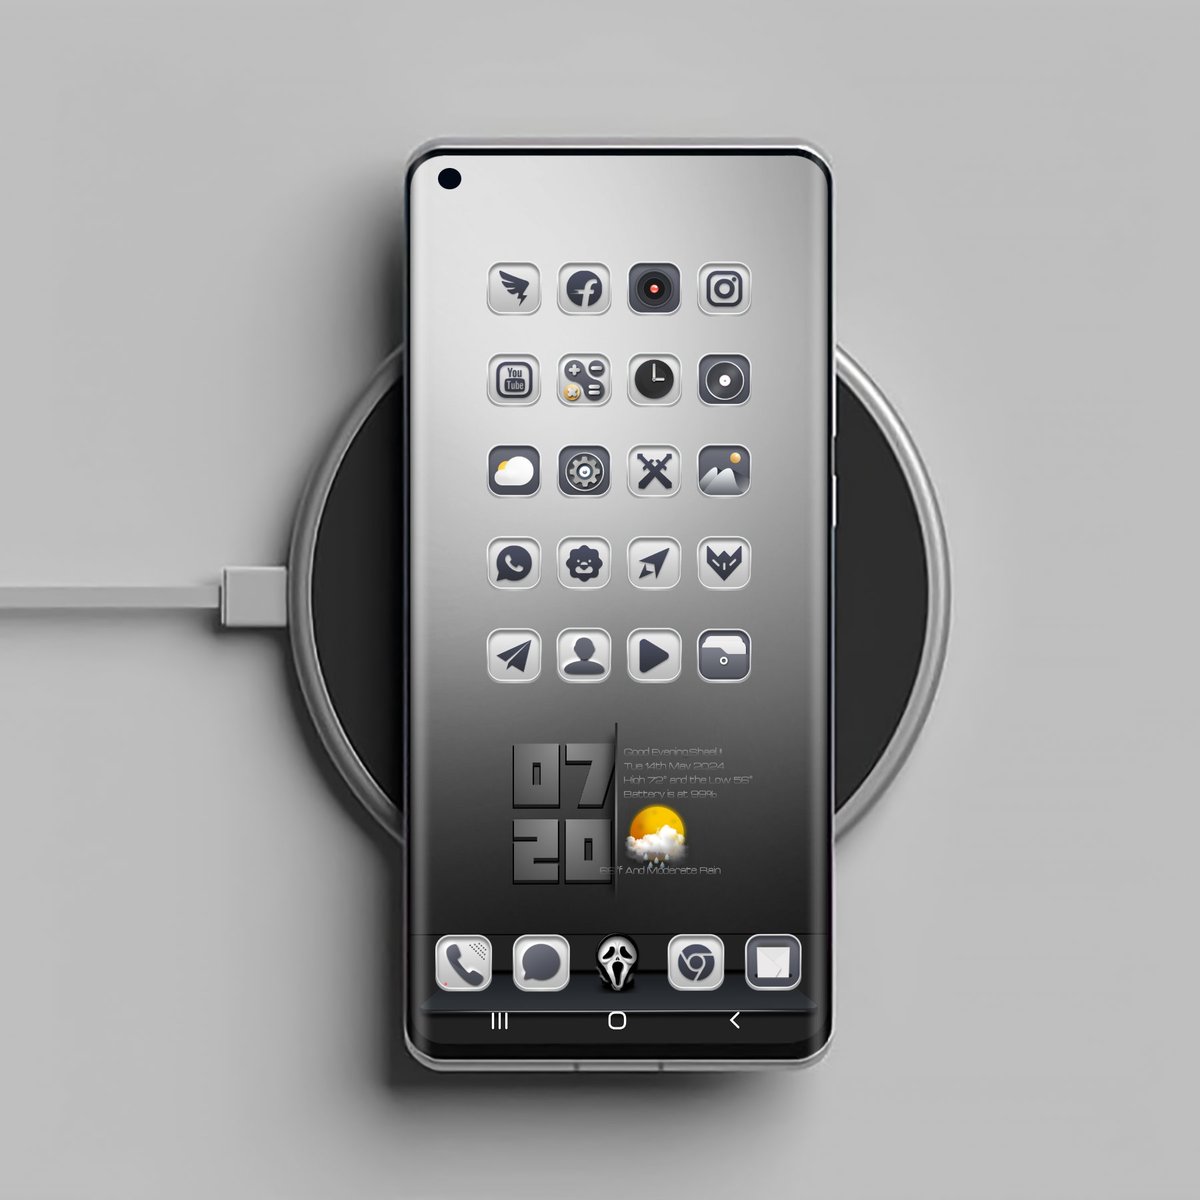 Tonight's setup this miui theme #GreyDream and widget ported by @shael_vaghela credit to the creator and @andro_idfans template.